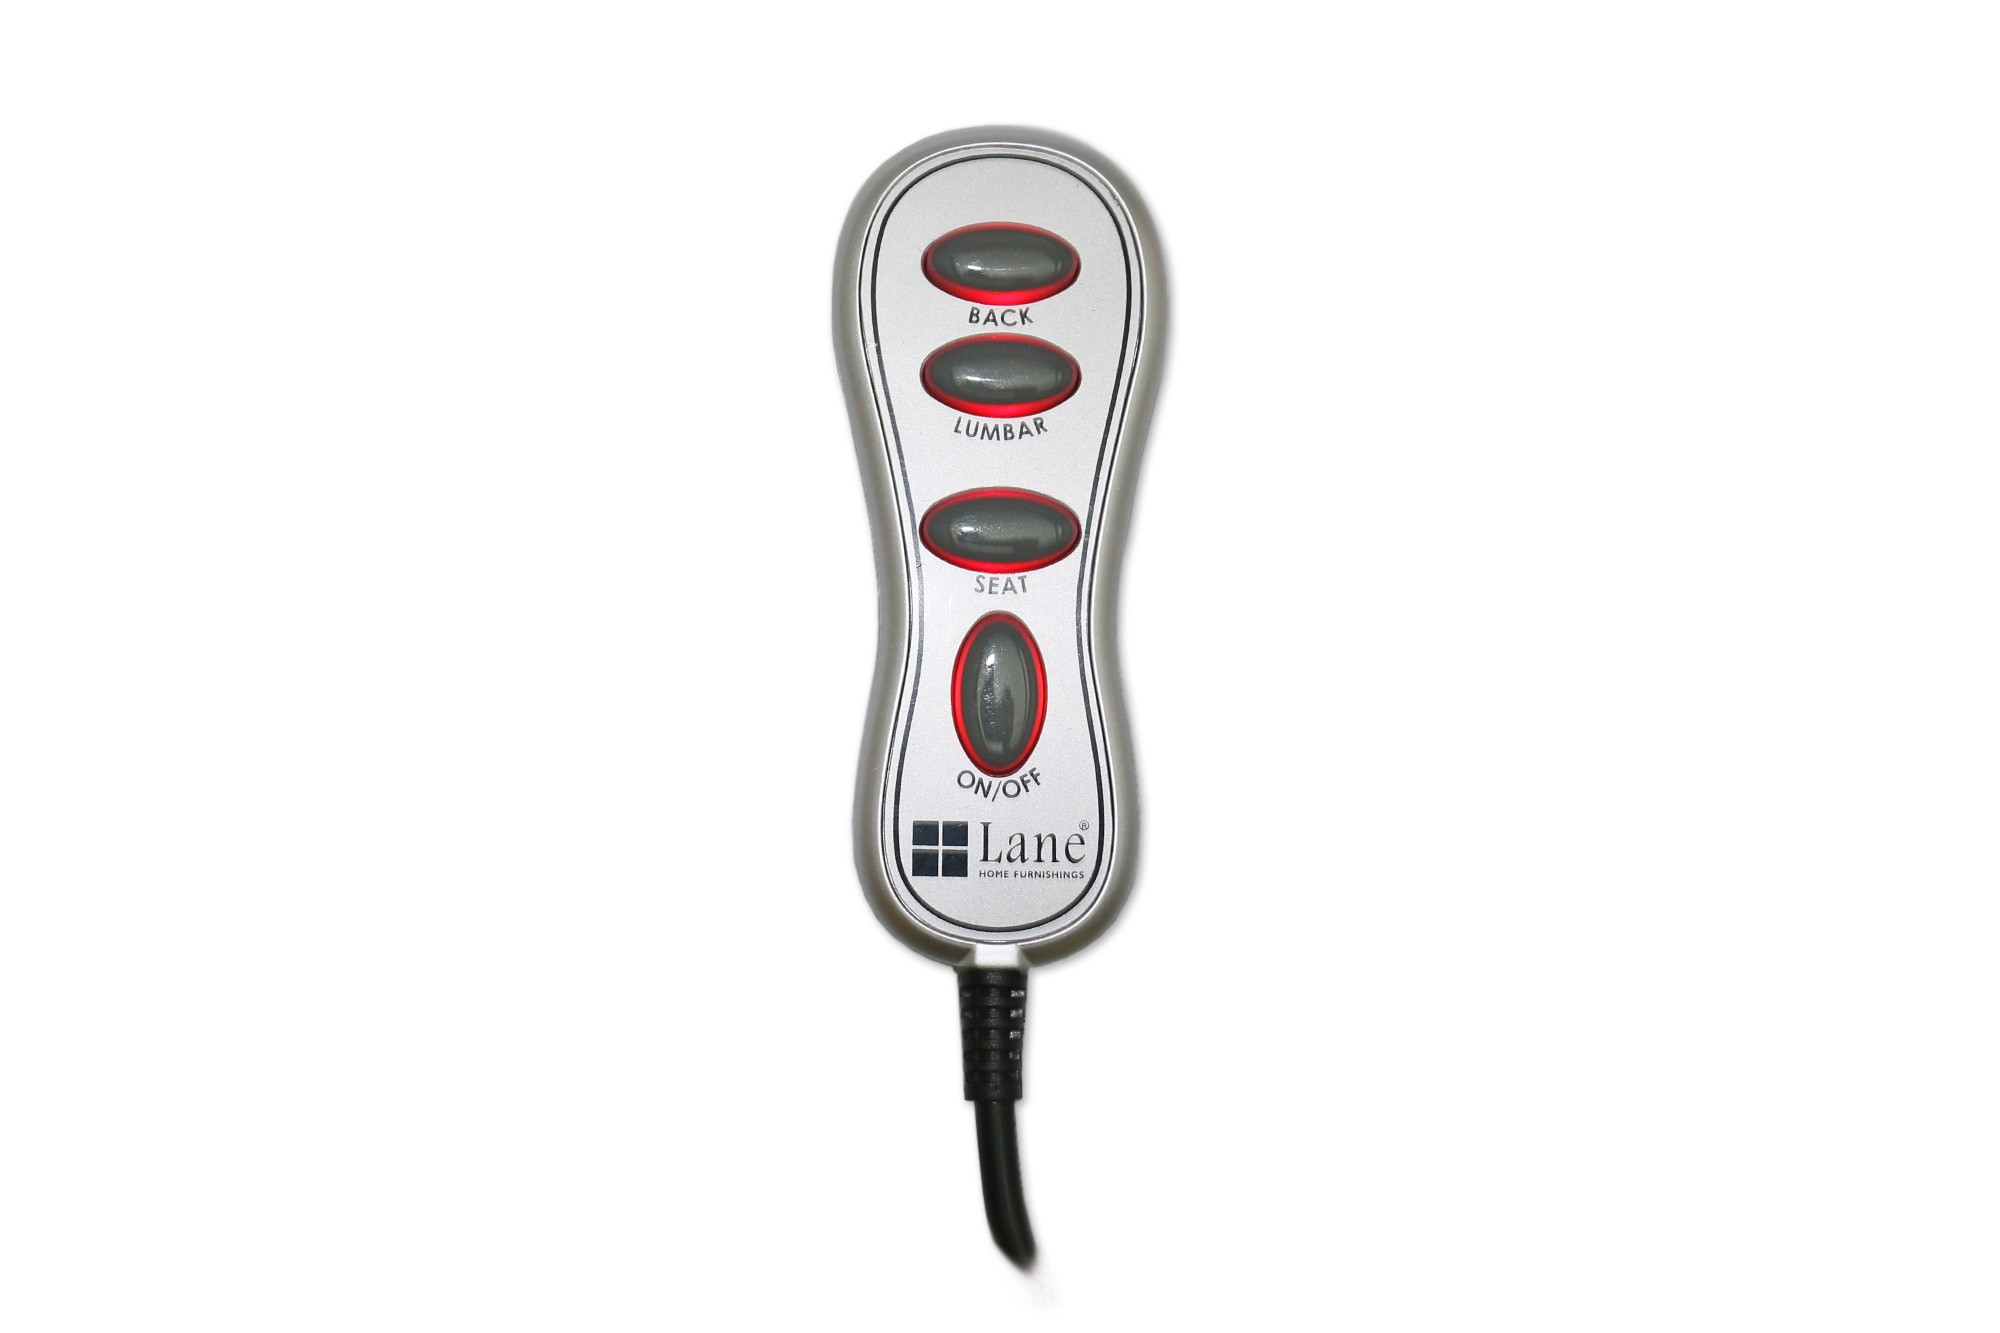 Hand remote control for heat, lumbar and seat